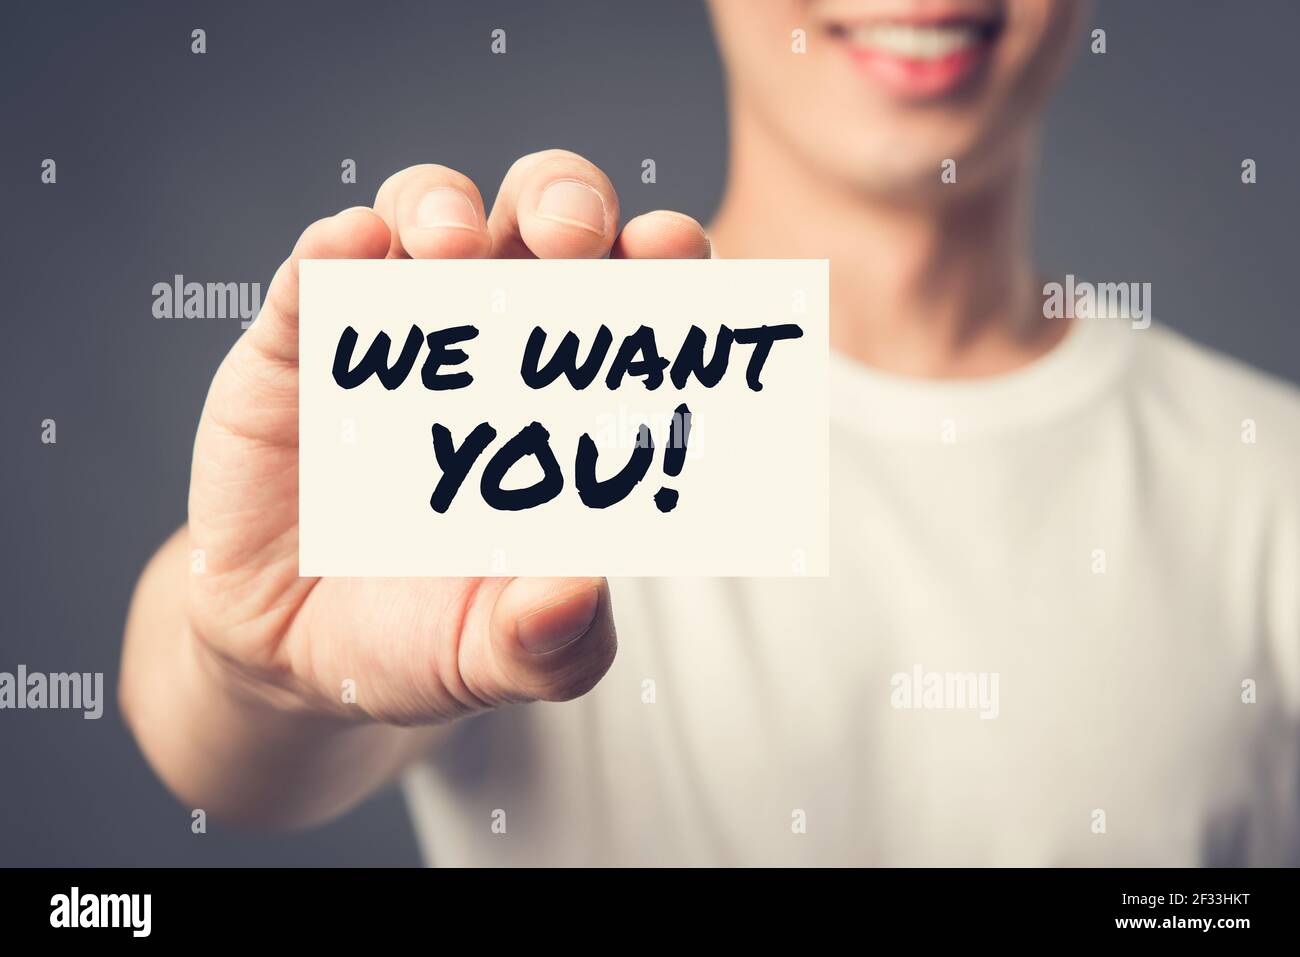 WE WANT YOU! message on the card shown by a man, vintage tone effect Stock Photo